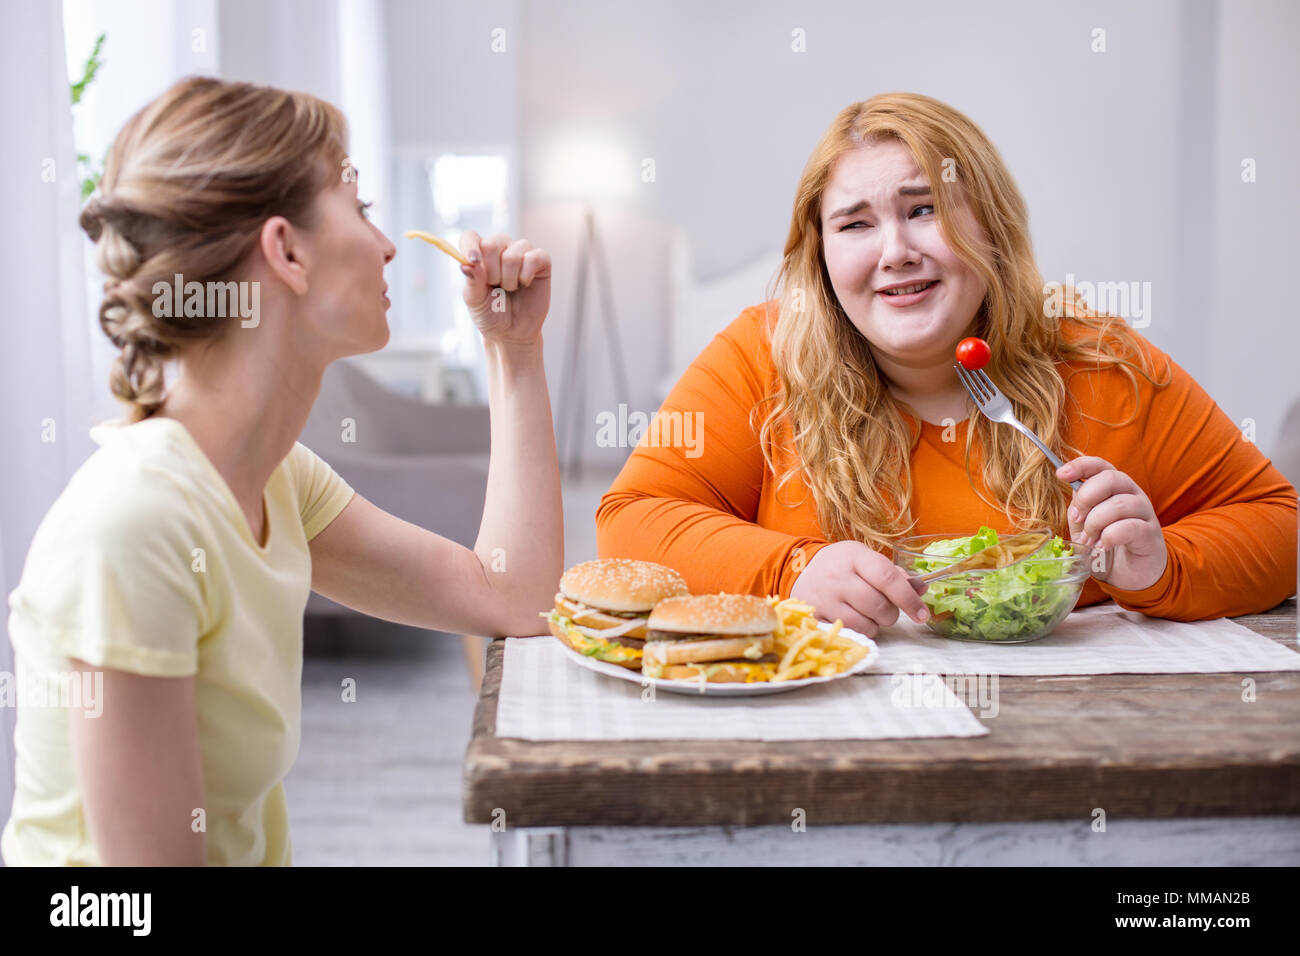 Miserable plump woman having lunch with her friend Stock Photo